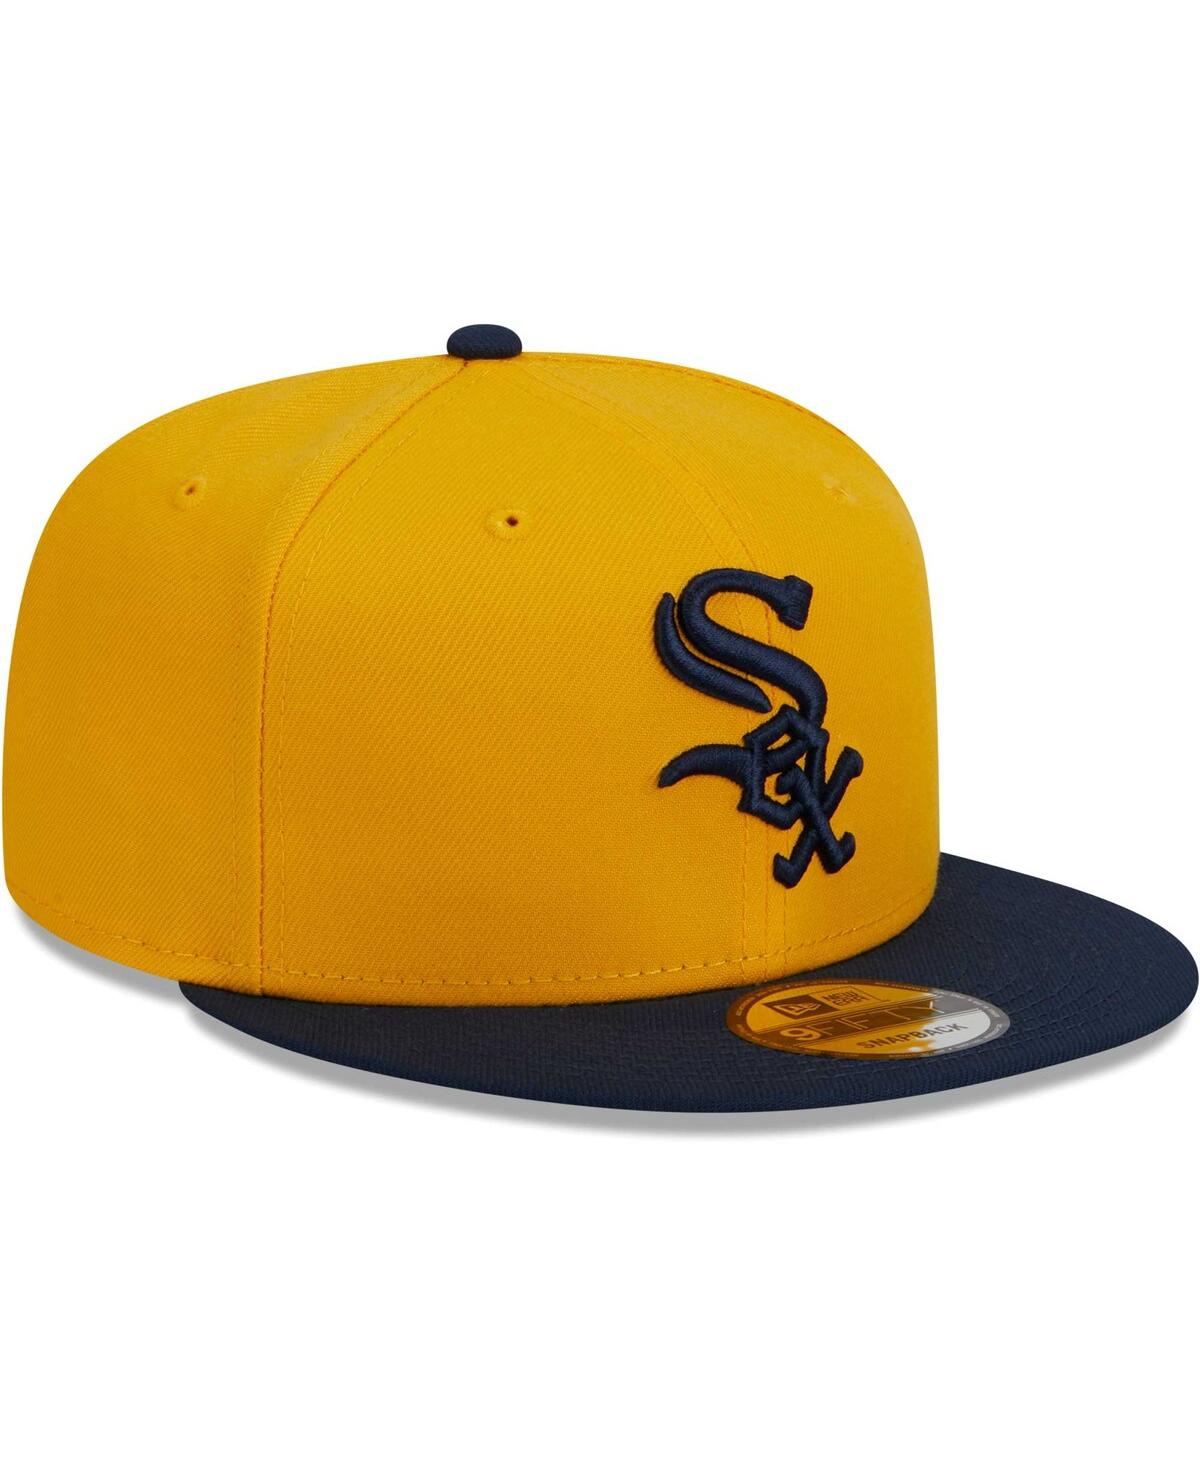 Texas Rangers New Era Spring Color Pack 9FIFTY Snapback Hat - Yellow